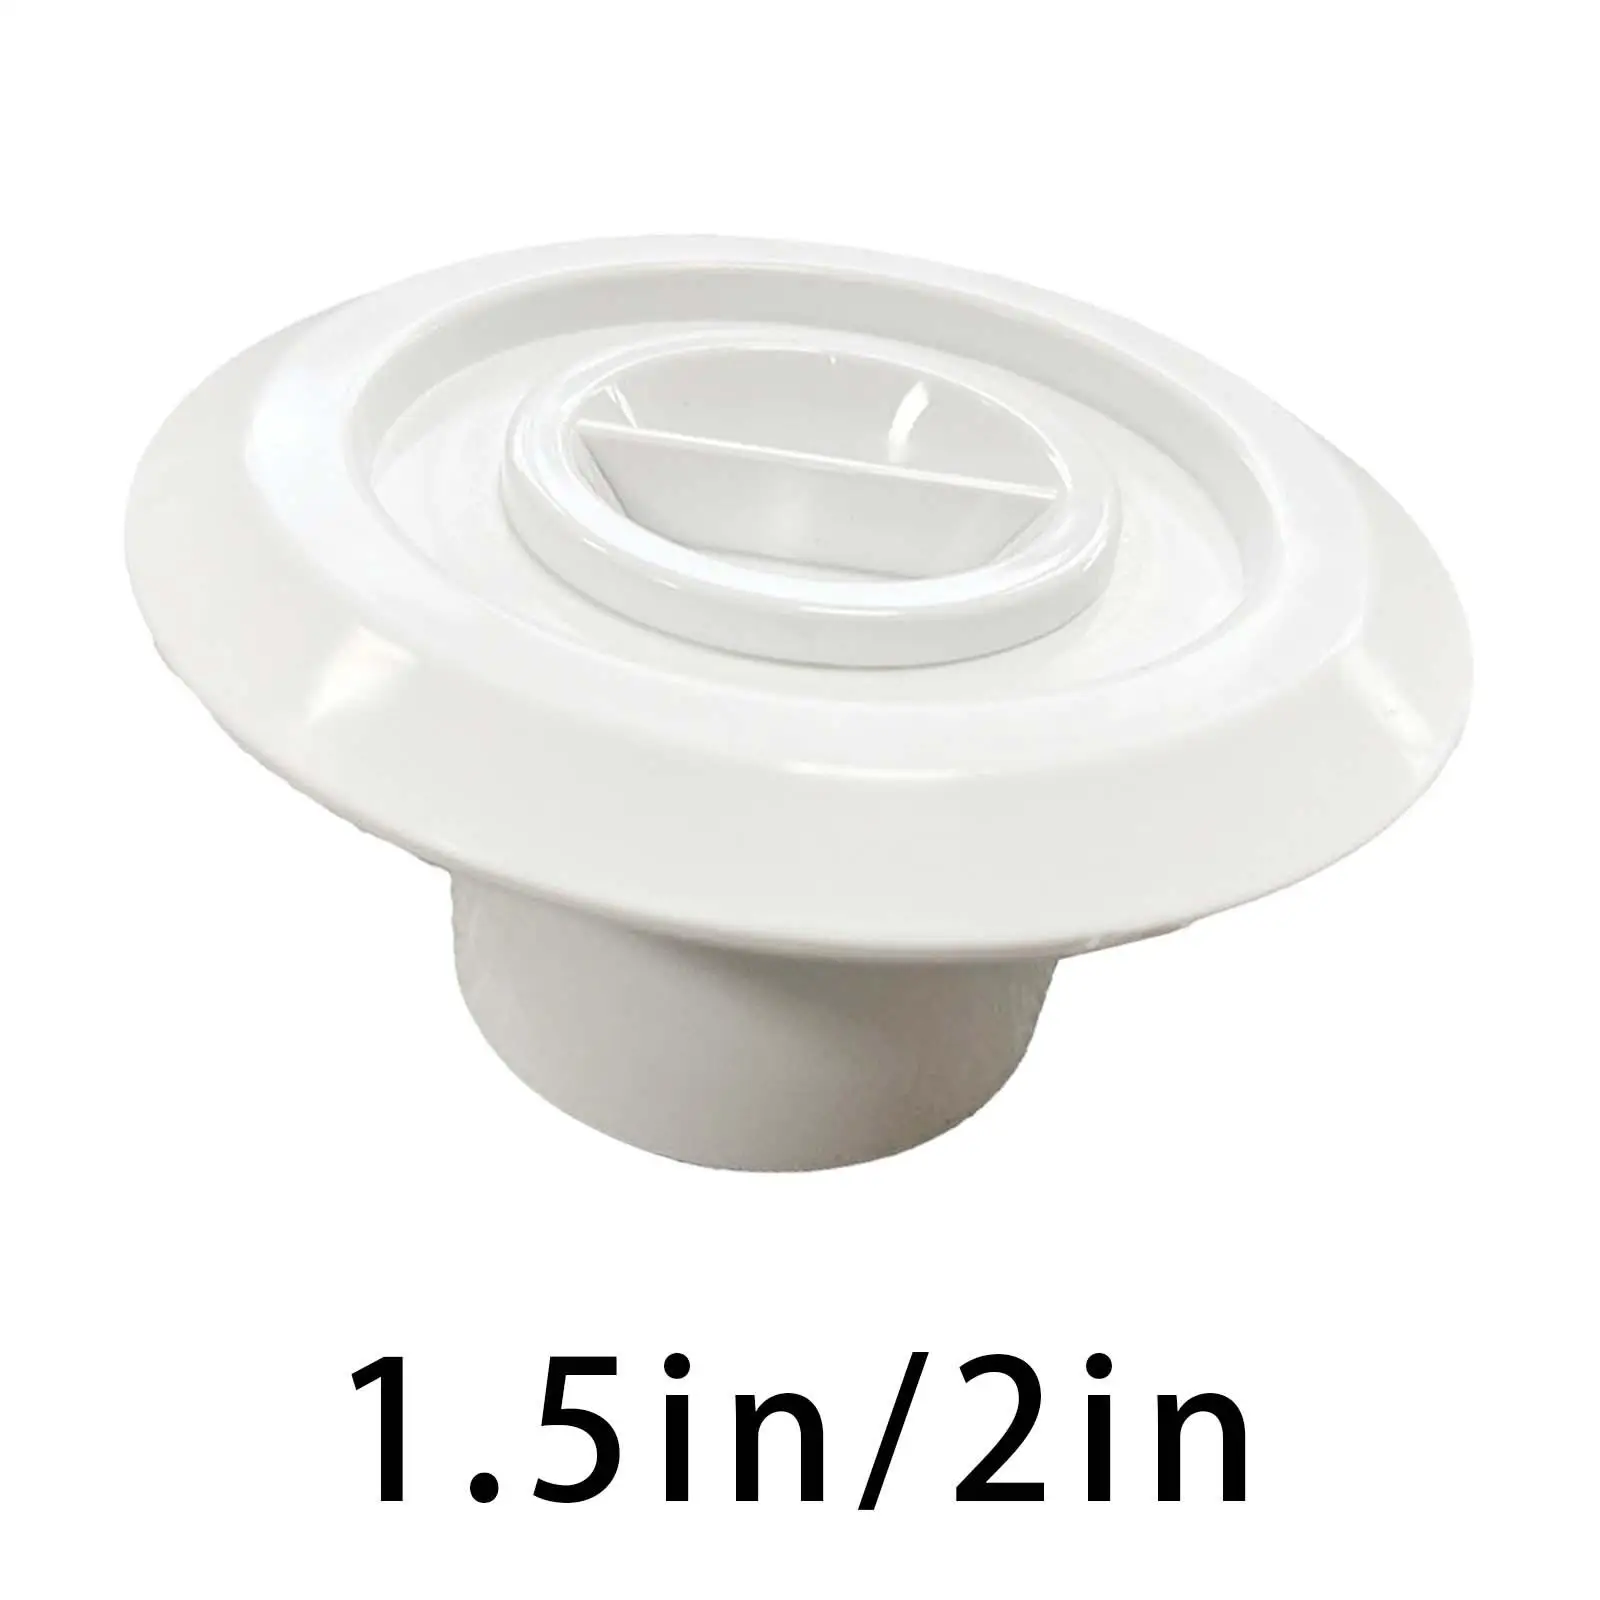 Pool Water Outlet Duable Filter Lightweight Swimming Pool Fittings Pools Floor Drainer for SPA Outdoor Massage Pool Accessory